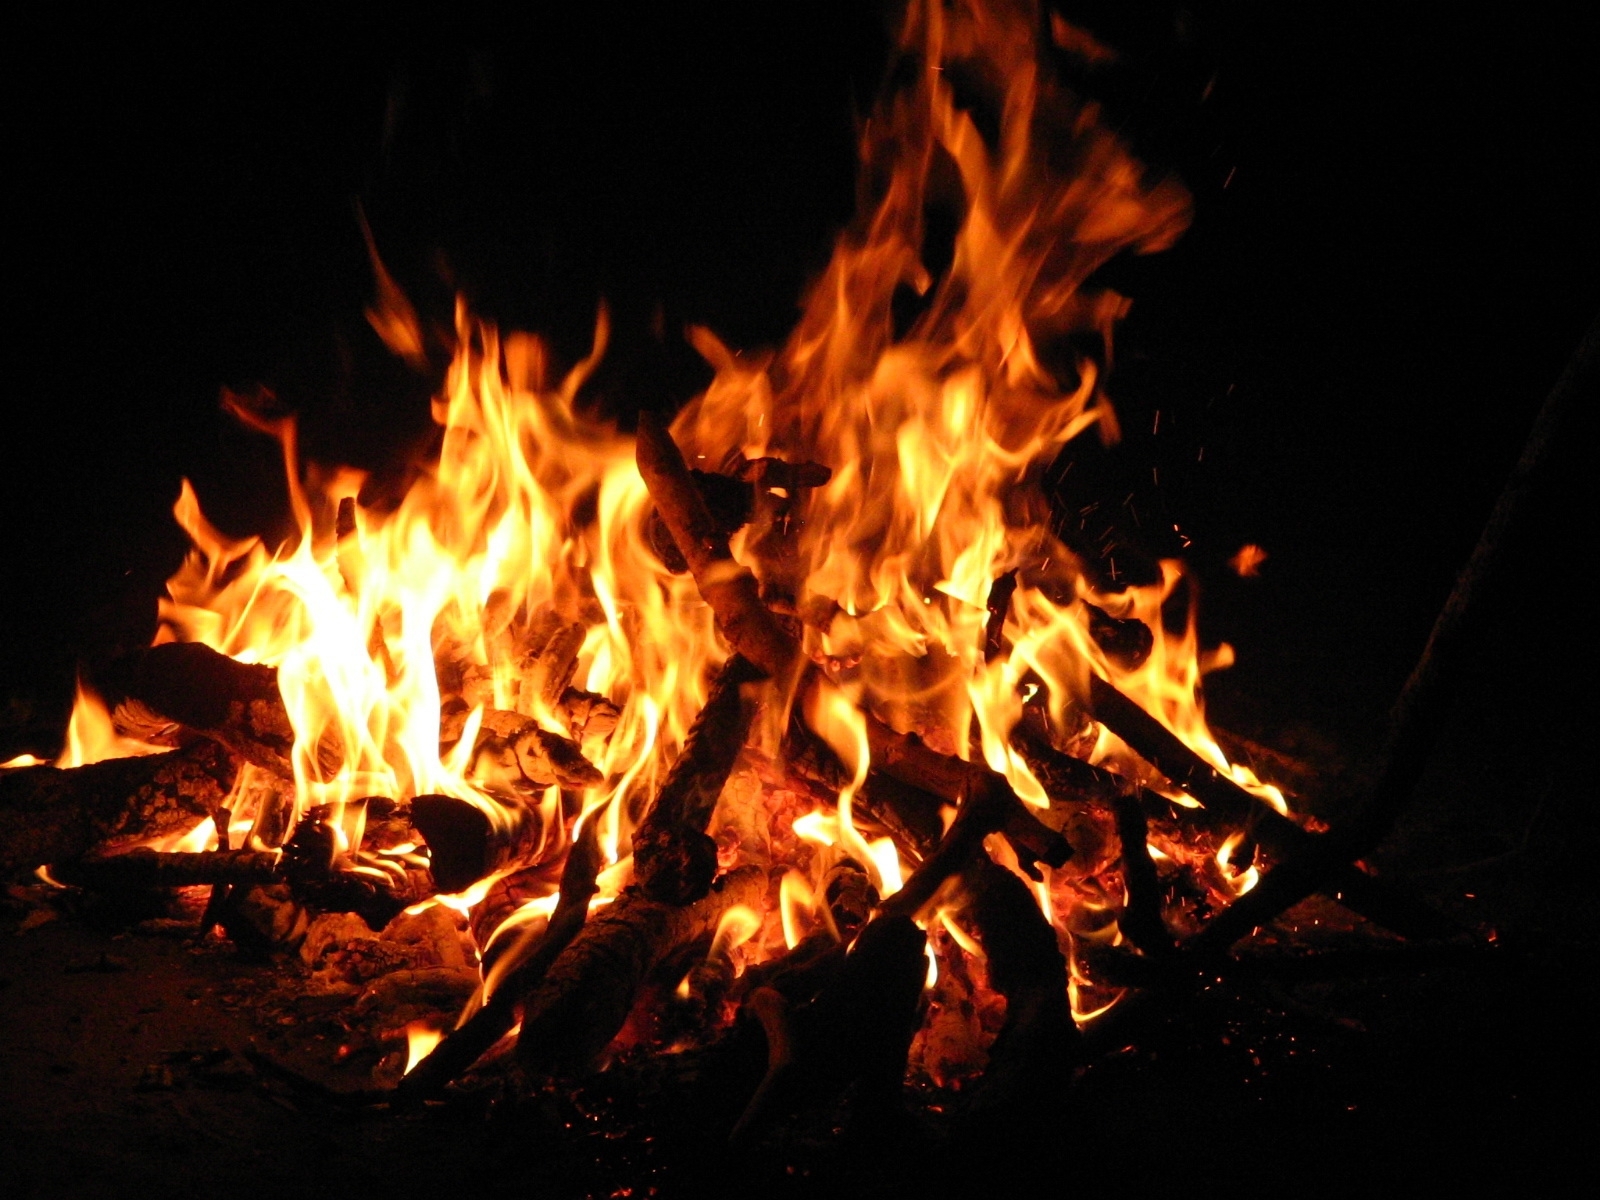 1553 download wallpaper landscape, fire, bonfire, art photo screensavers and pictures for free